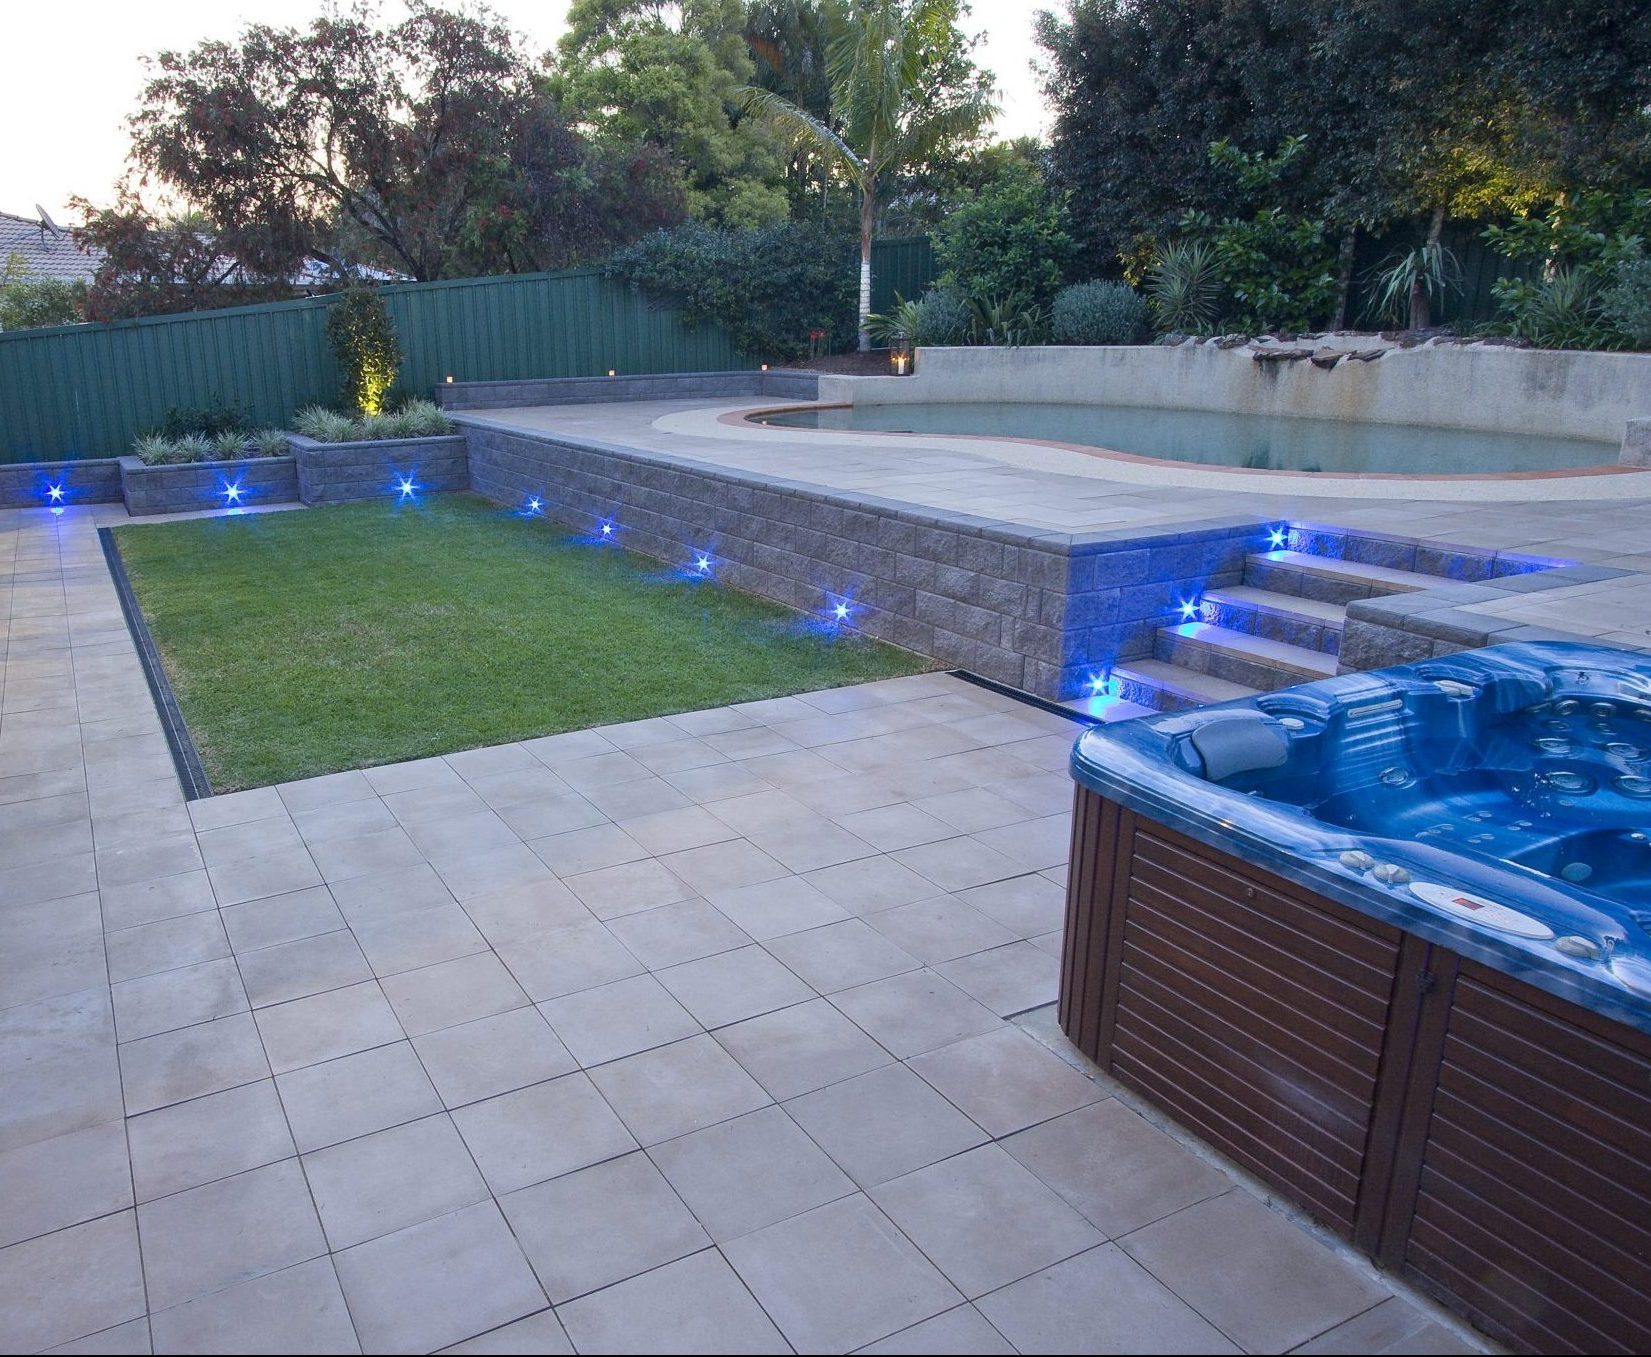 Metre_high_TrendStone_retaining_wall_with_steps_and_lights_installed_by_a_landscaper